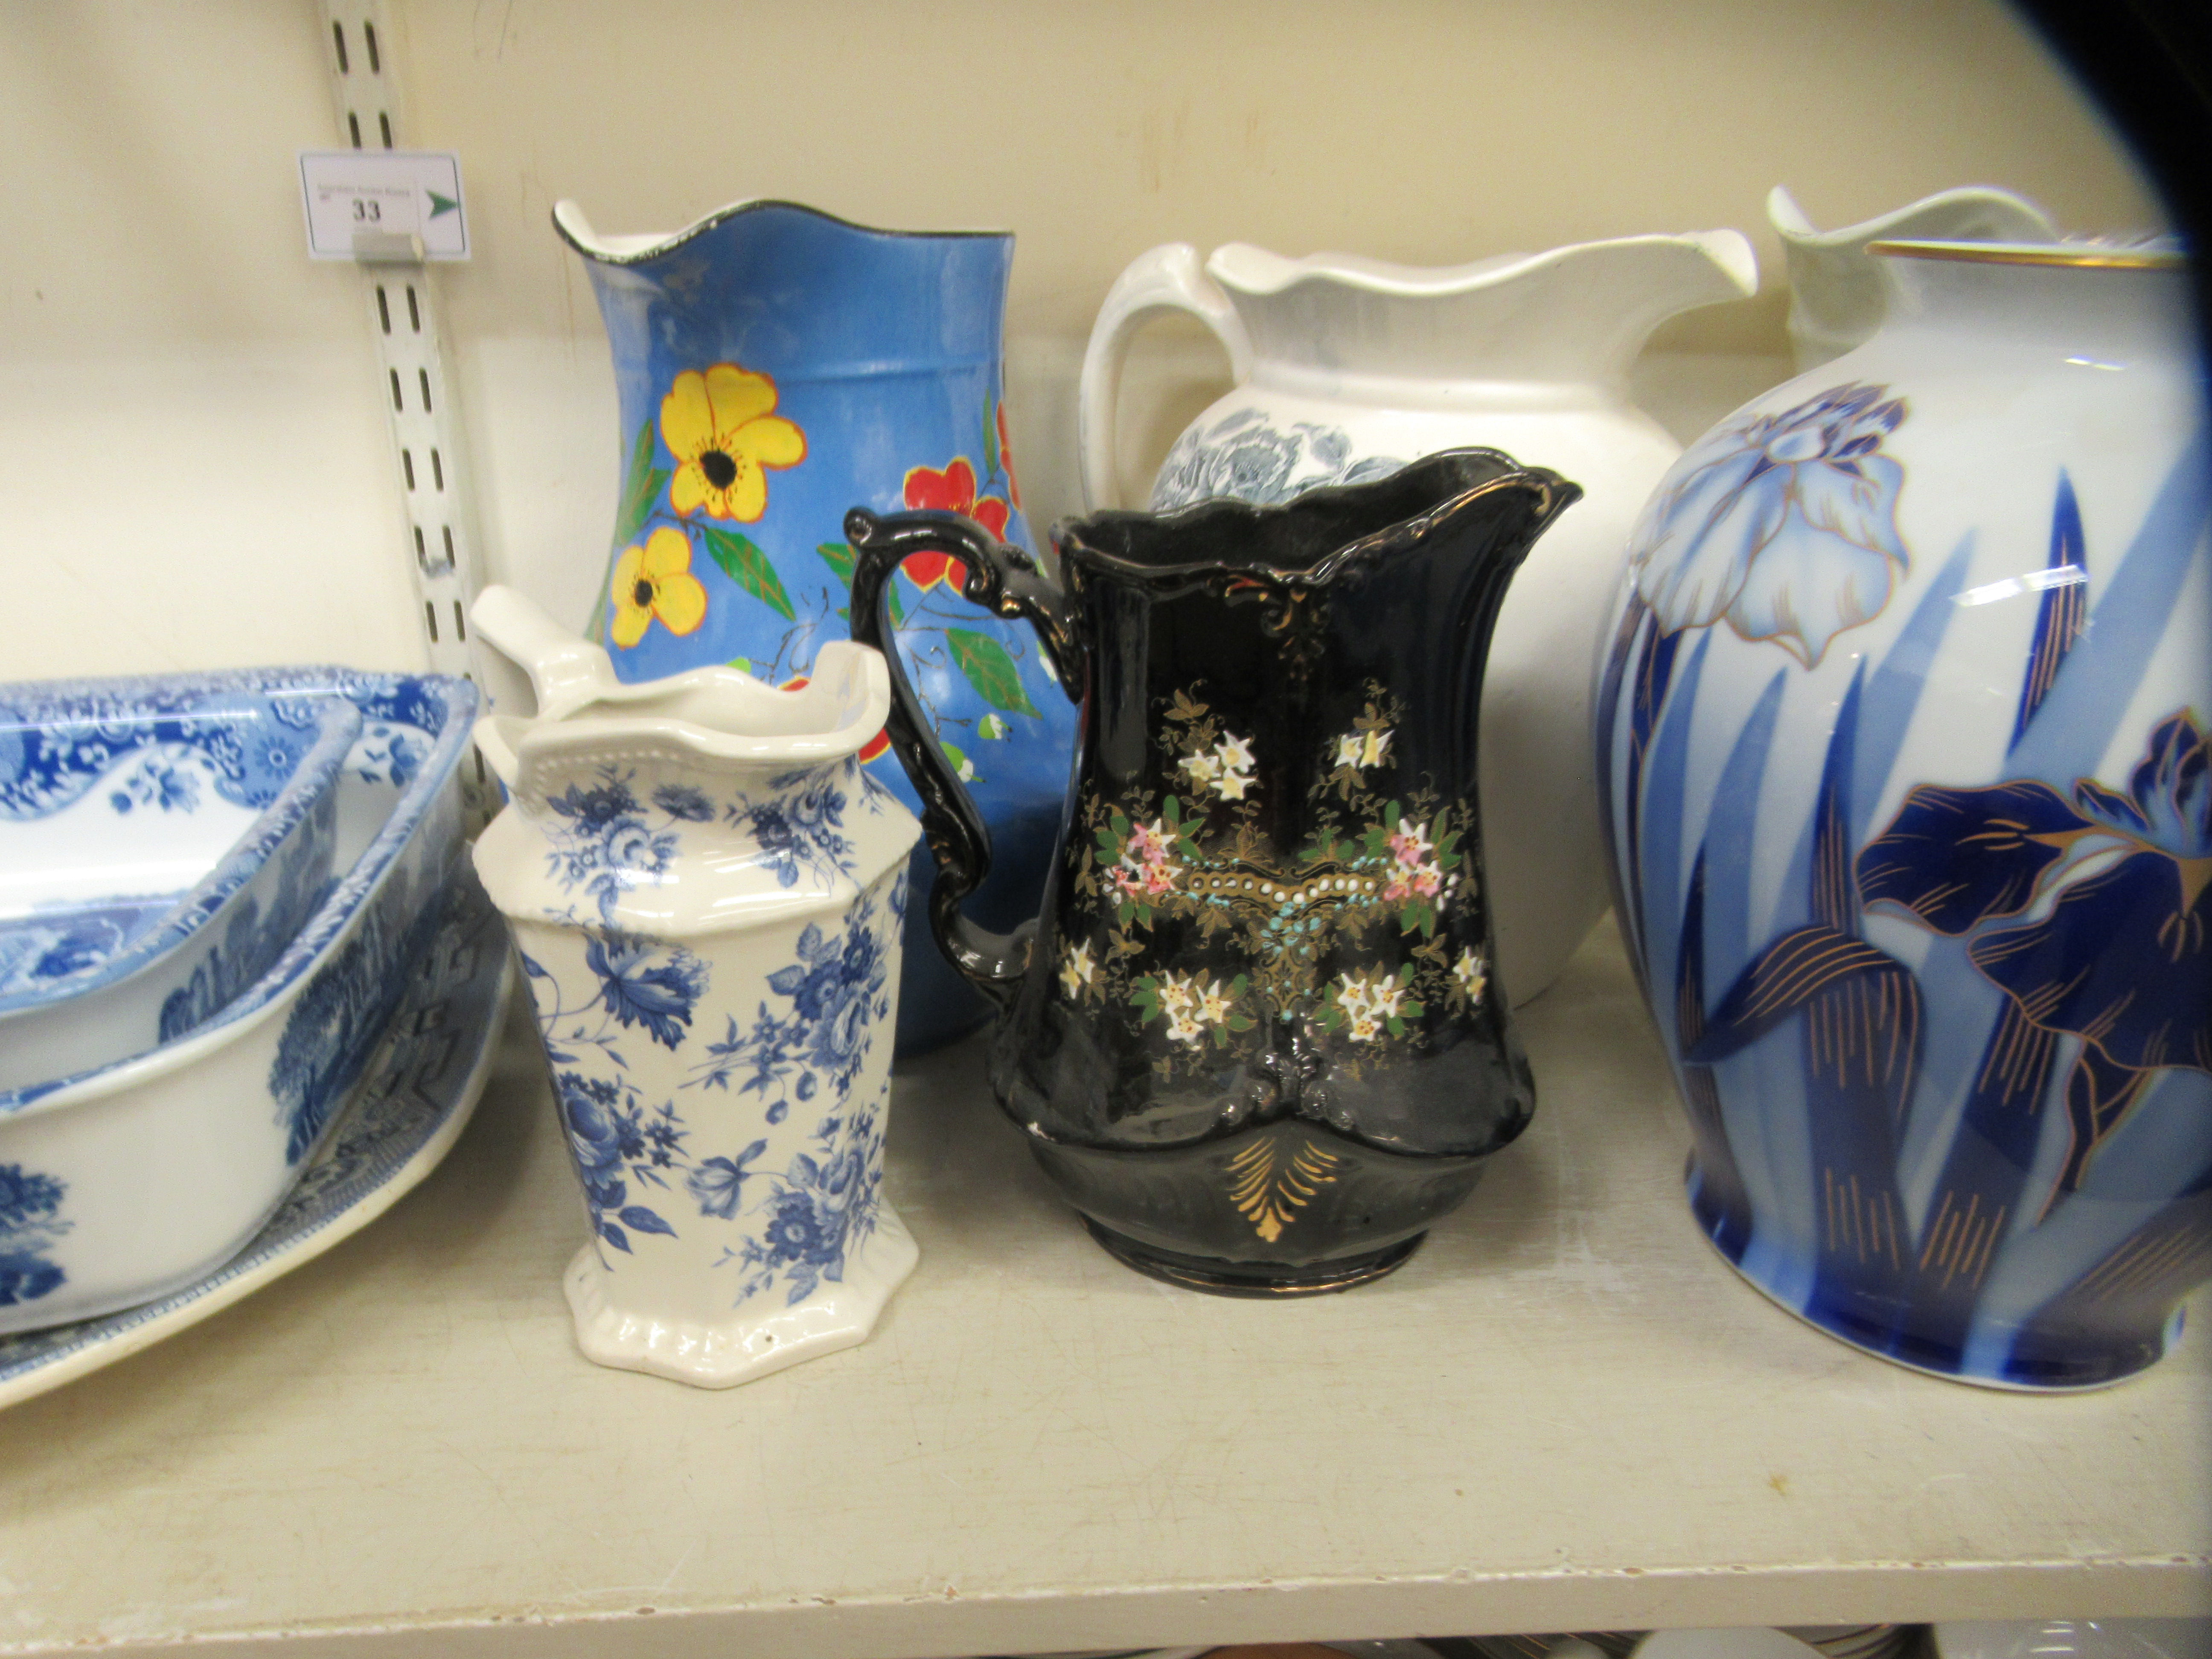 Late 19thC and 20thC china toiletry ware, kitchen items and miscellaneous tableware - Image 3 of 4